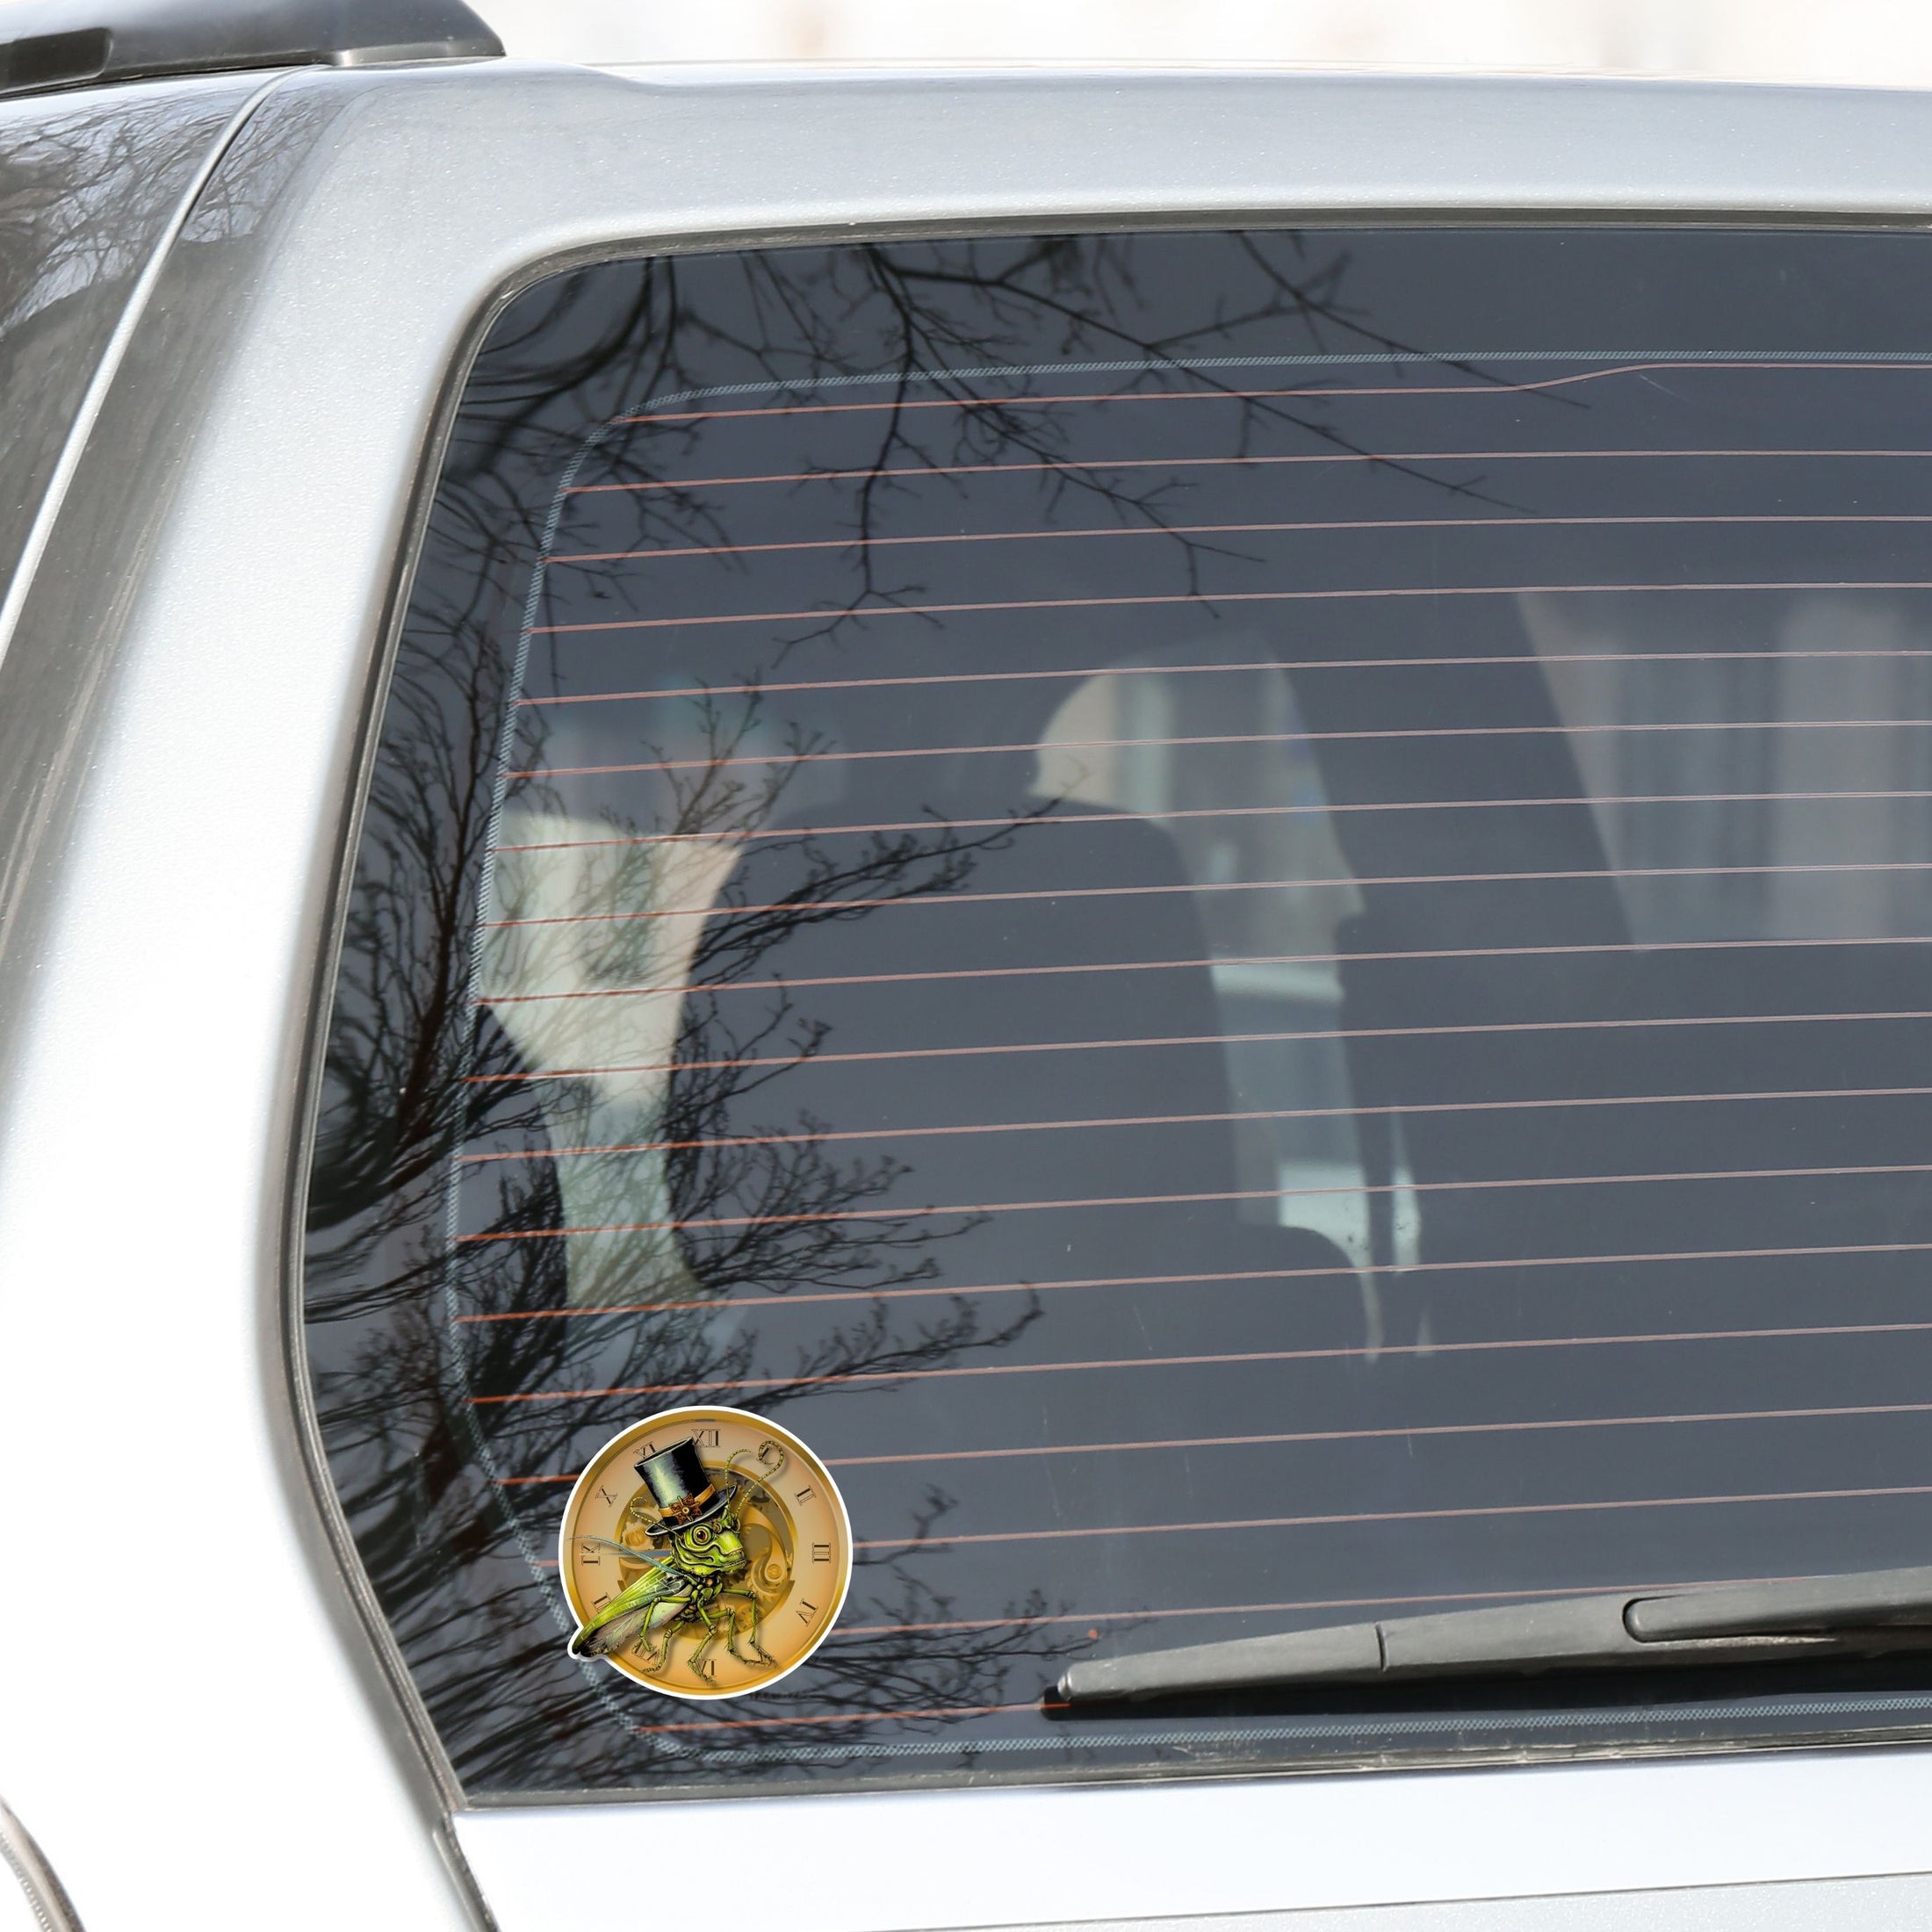 This image shows the steampunk grasshopper sticker on the back window of a car.